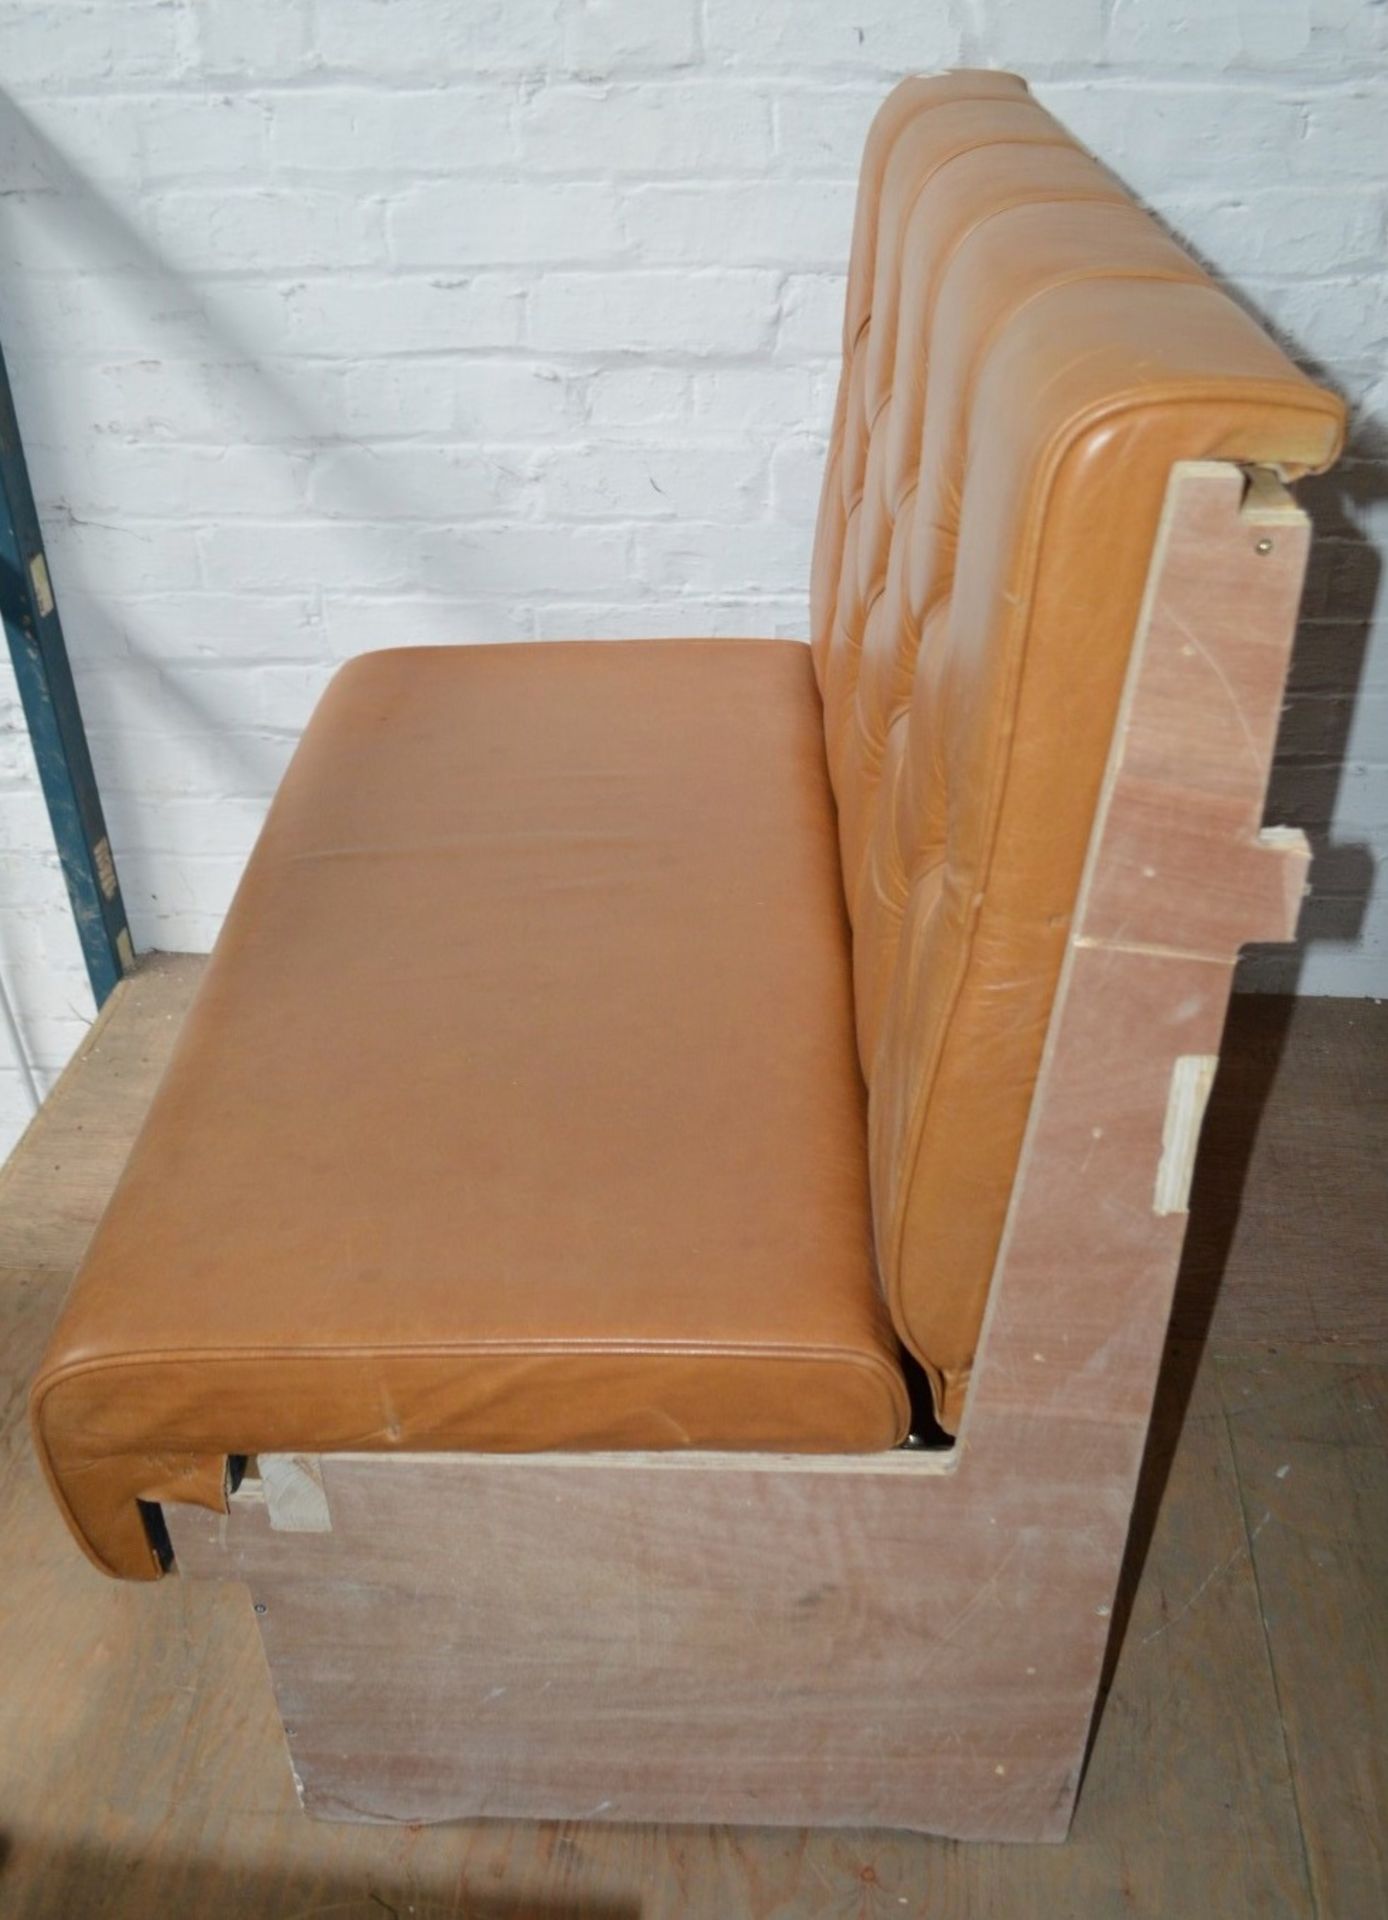 1 x Contemporary Seating Booth Section Upholstered In A Tan Coloured Leather - Image 5 of 9